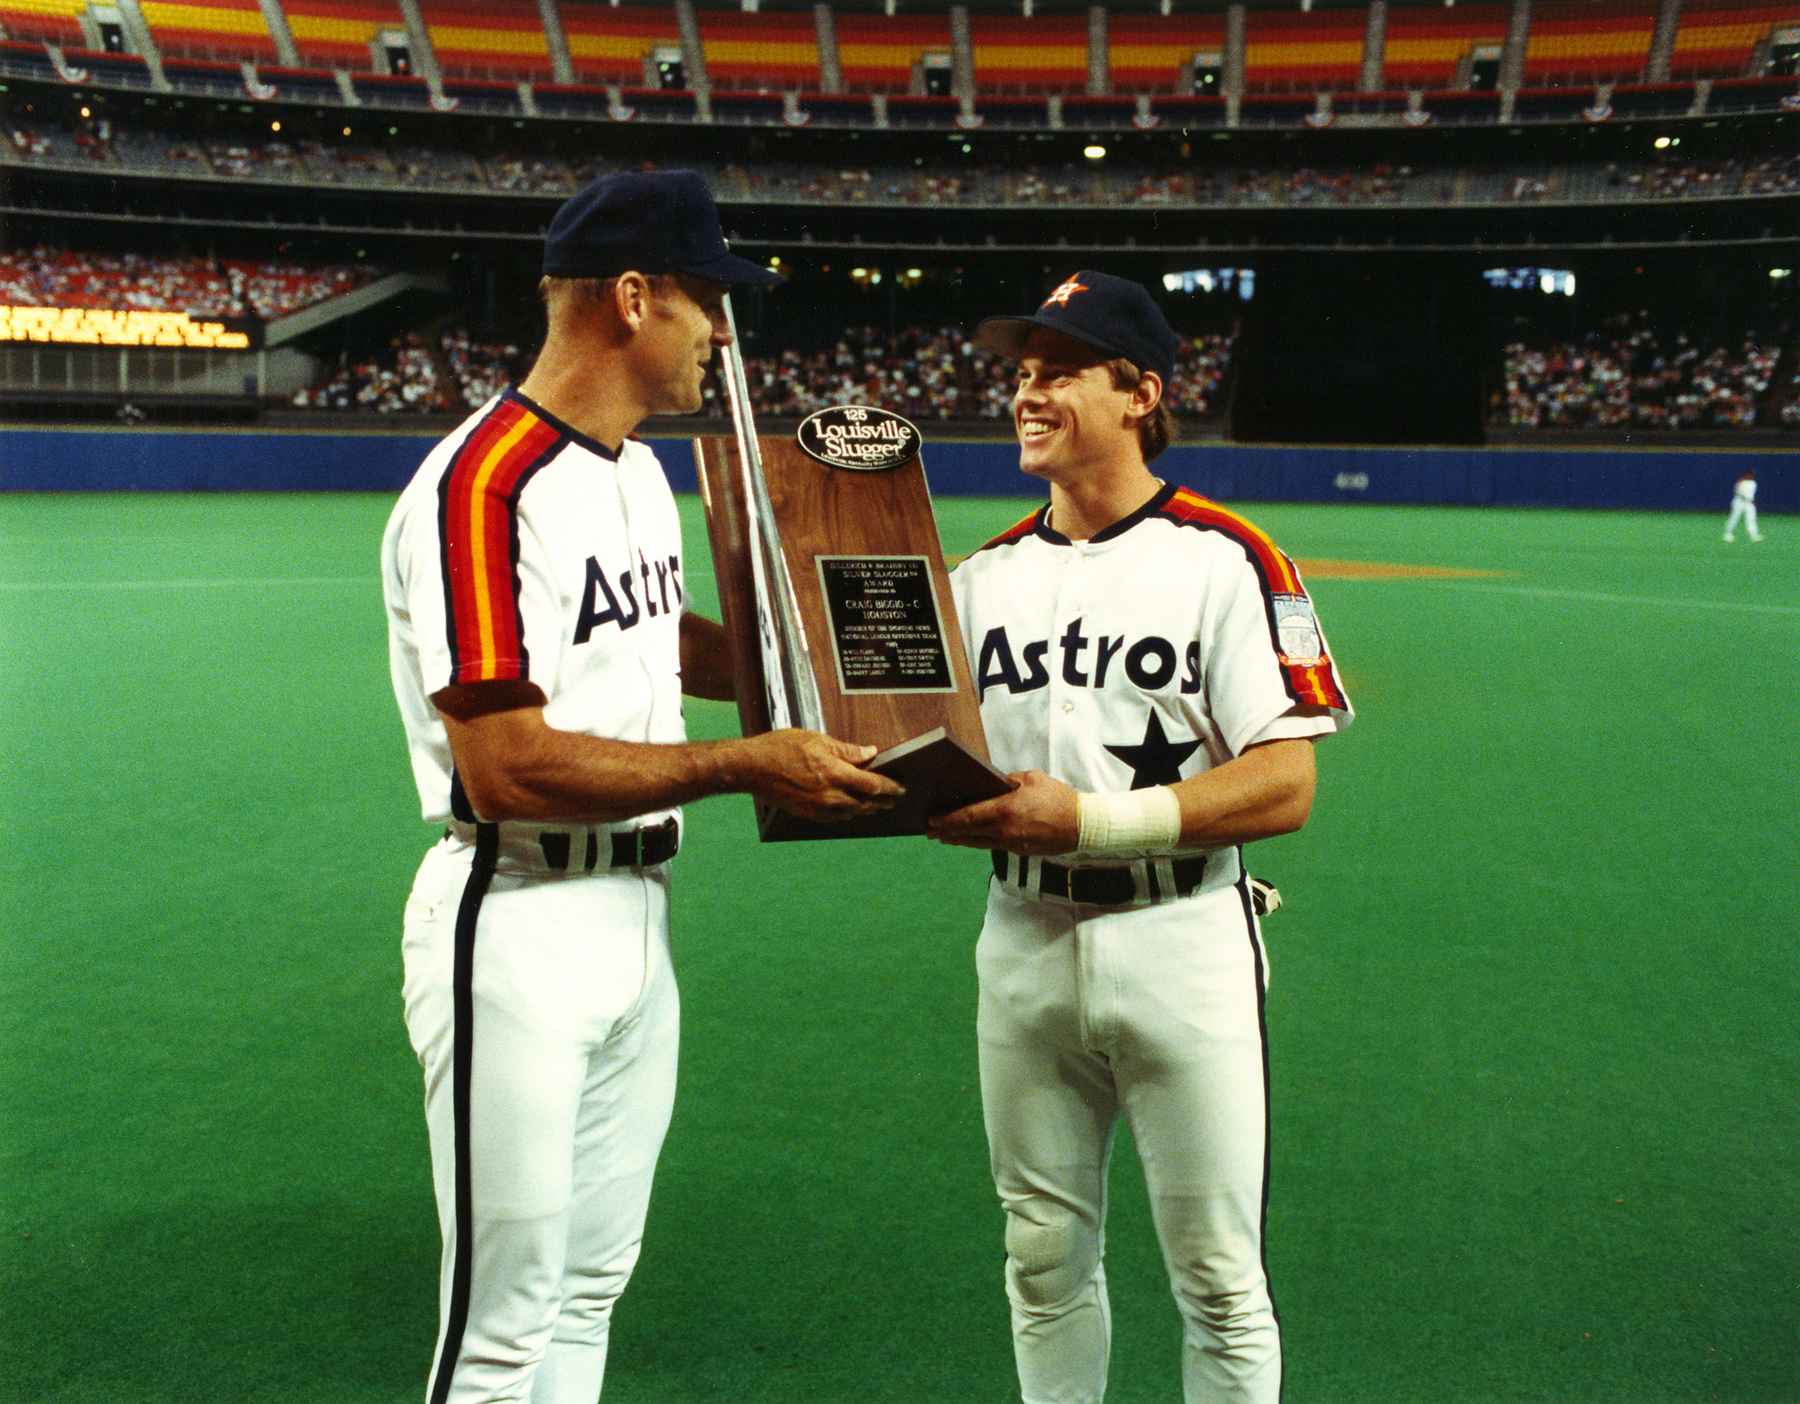 The Astrodome saw its share of stars over the years, including Biggio, who receives his 1989 Silver Slugger Award from manager Art Howe, left.